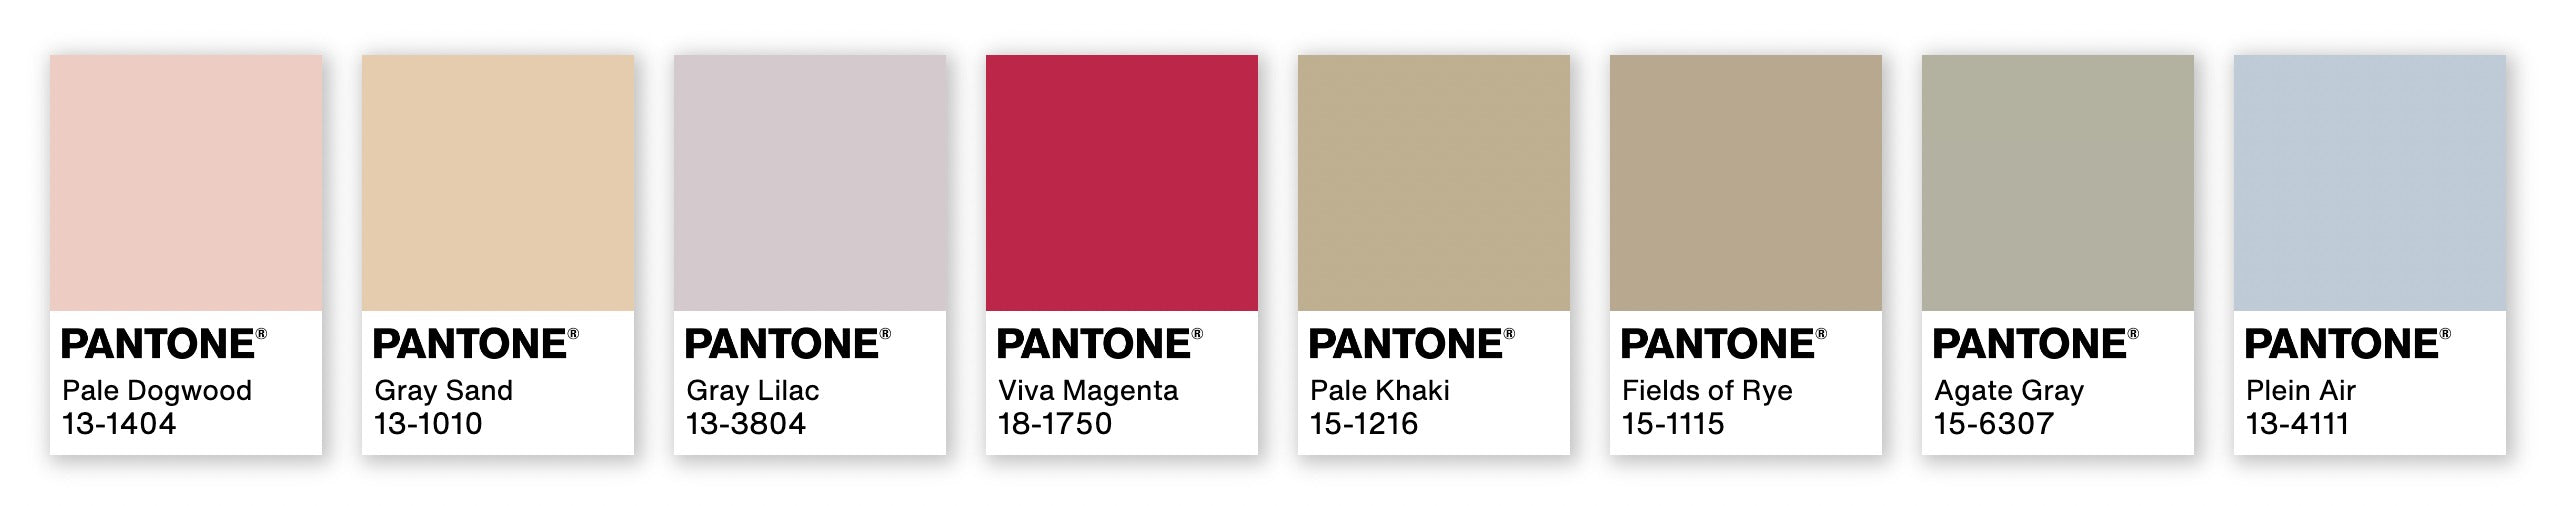 PANTONE Color of the Year 2000-2023 #pantone #color  Pantone color, Pantone  color chart, Pantone colour palettes